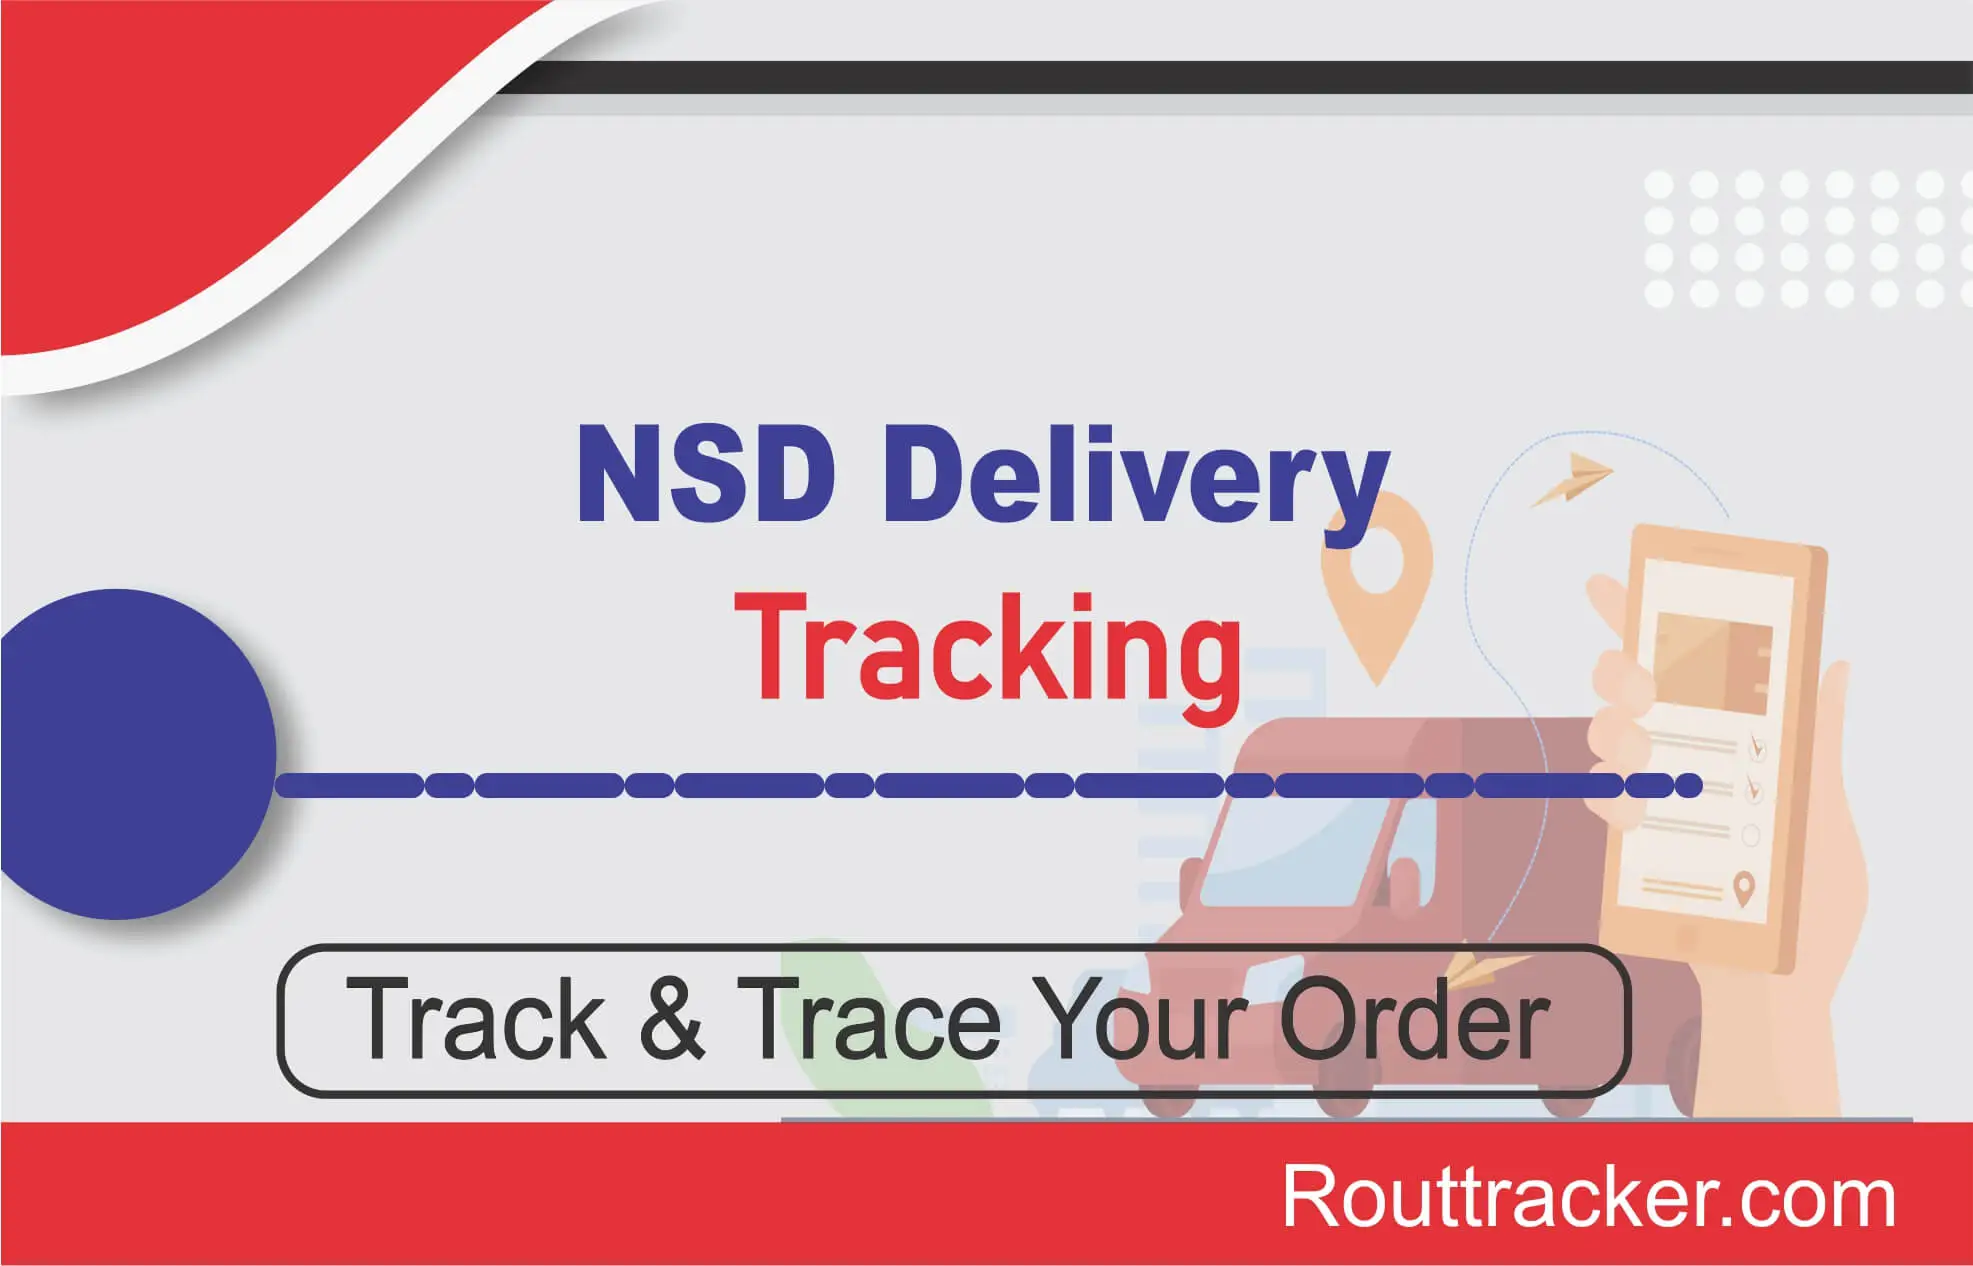 NSD Delivery Tracking